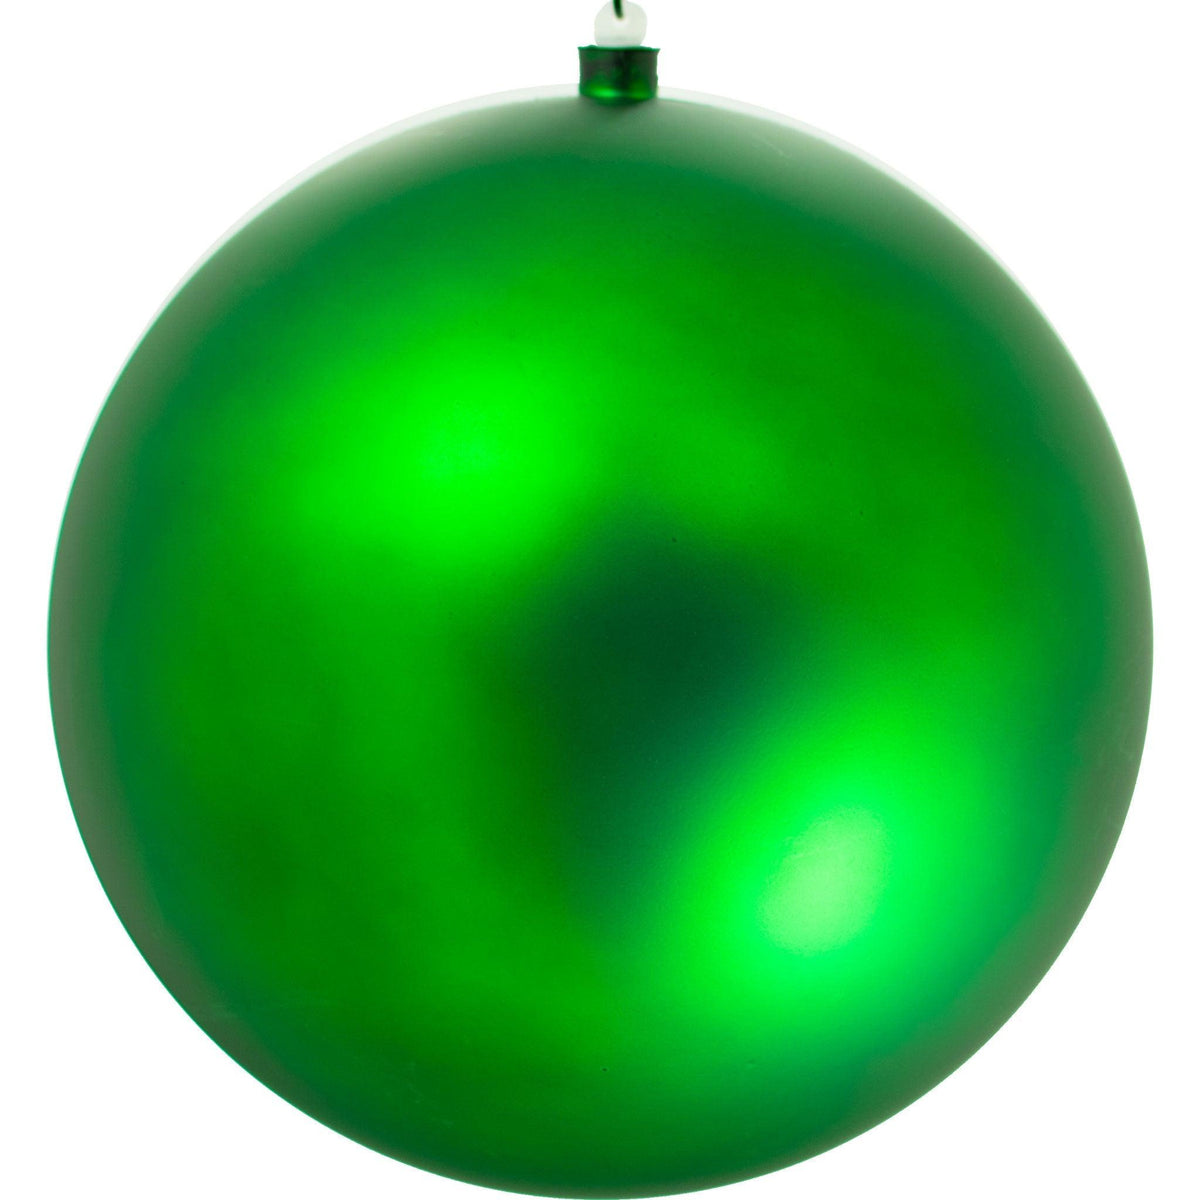 Lee Display offers brand new Shiny Matte Green Plastic Ball Ornaments at wholesale prices for affordable Christmas Tree Hanging and Holiday Decorating on sale at leedisplay.com